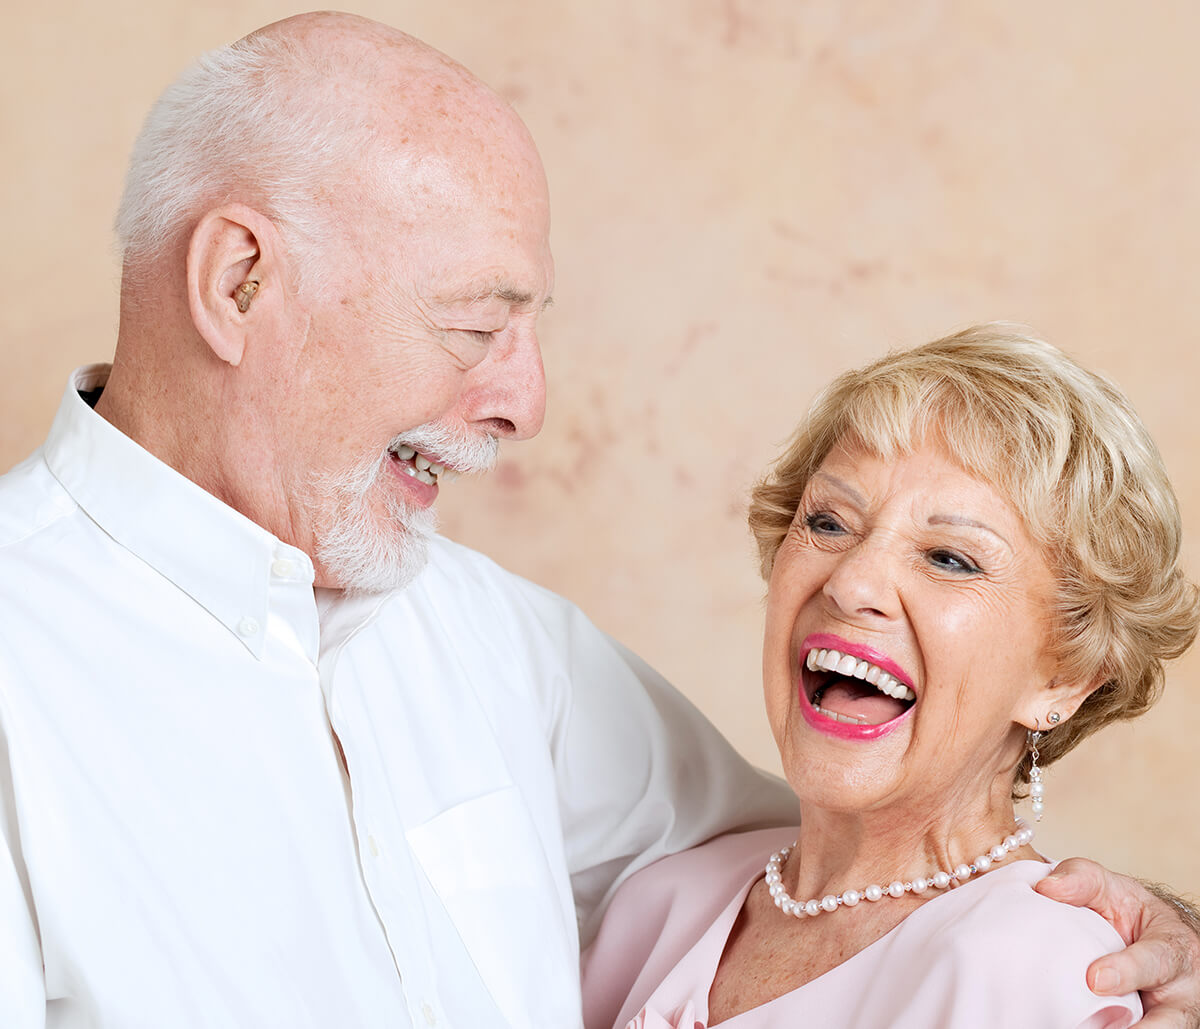 Get Quality Dentures at Virtue Dental Care in Yadkinville Area